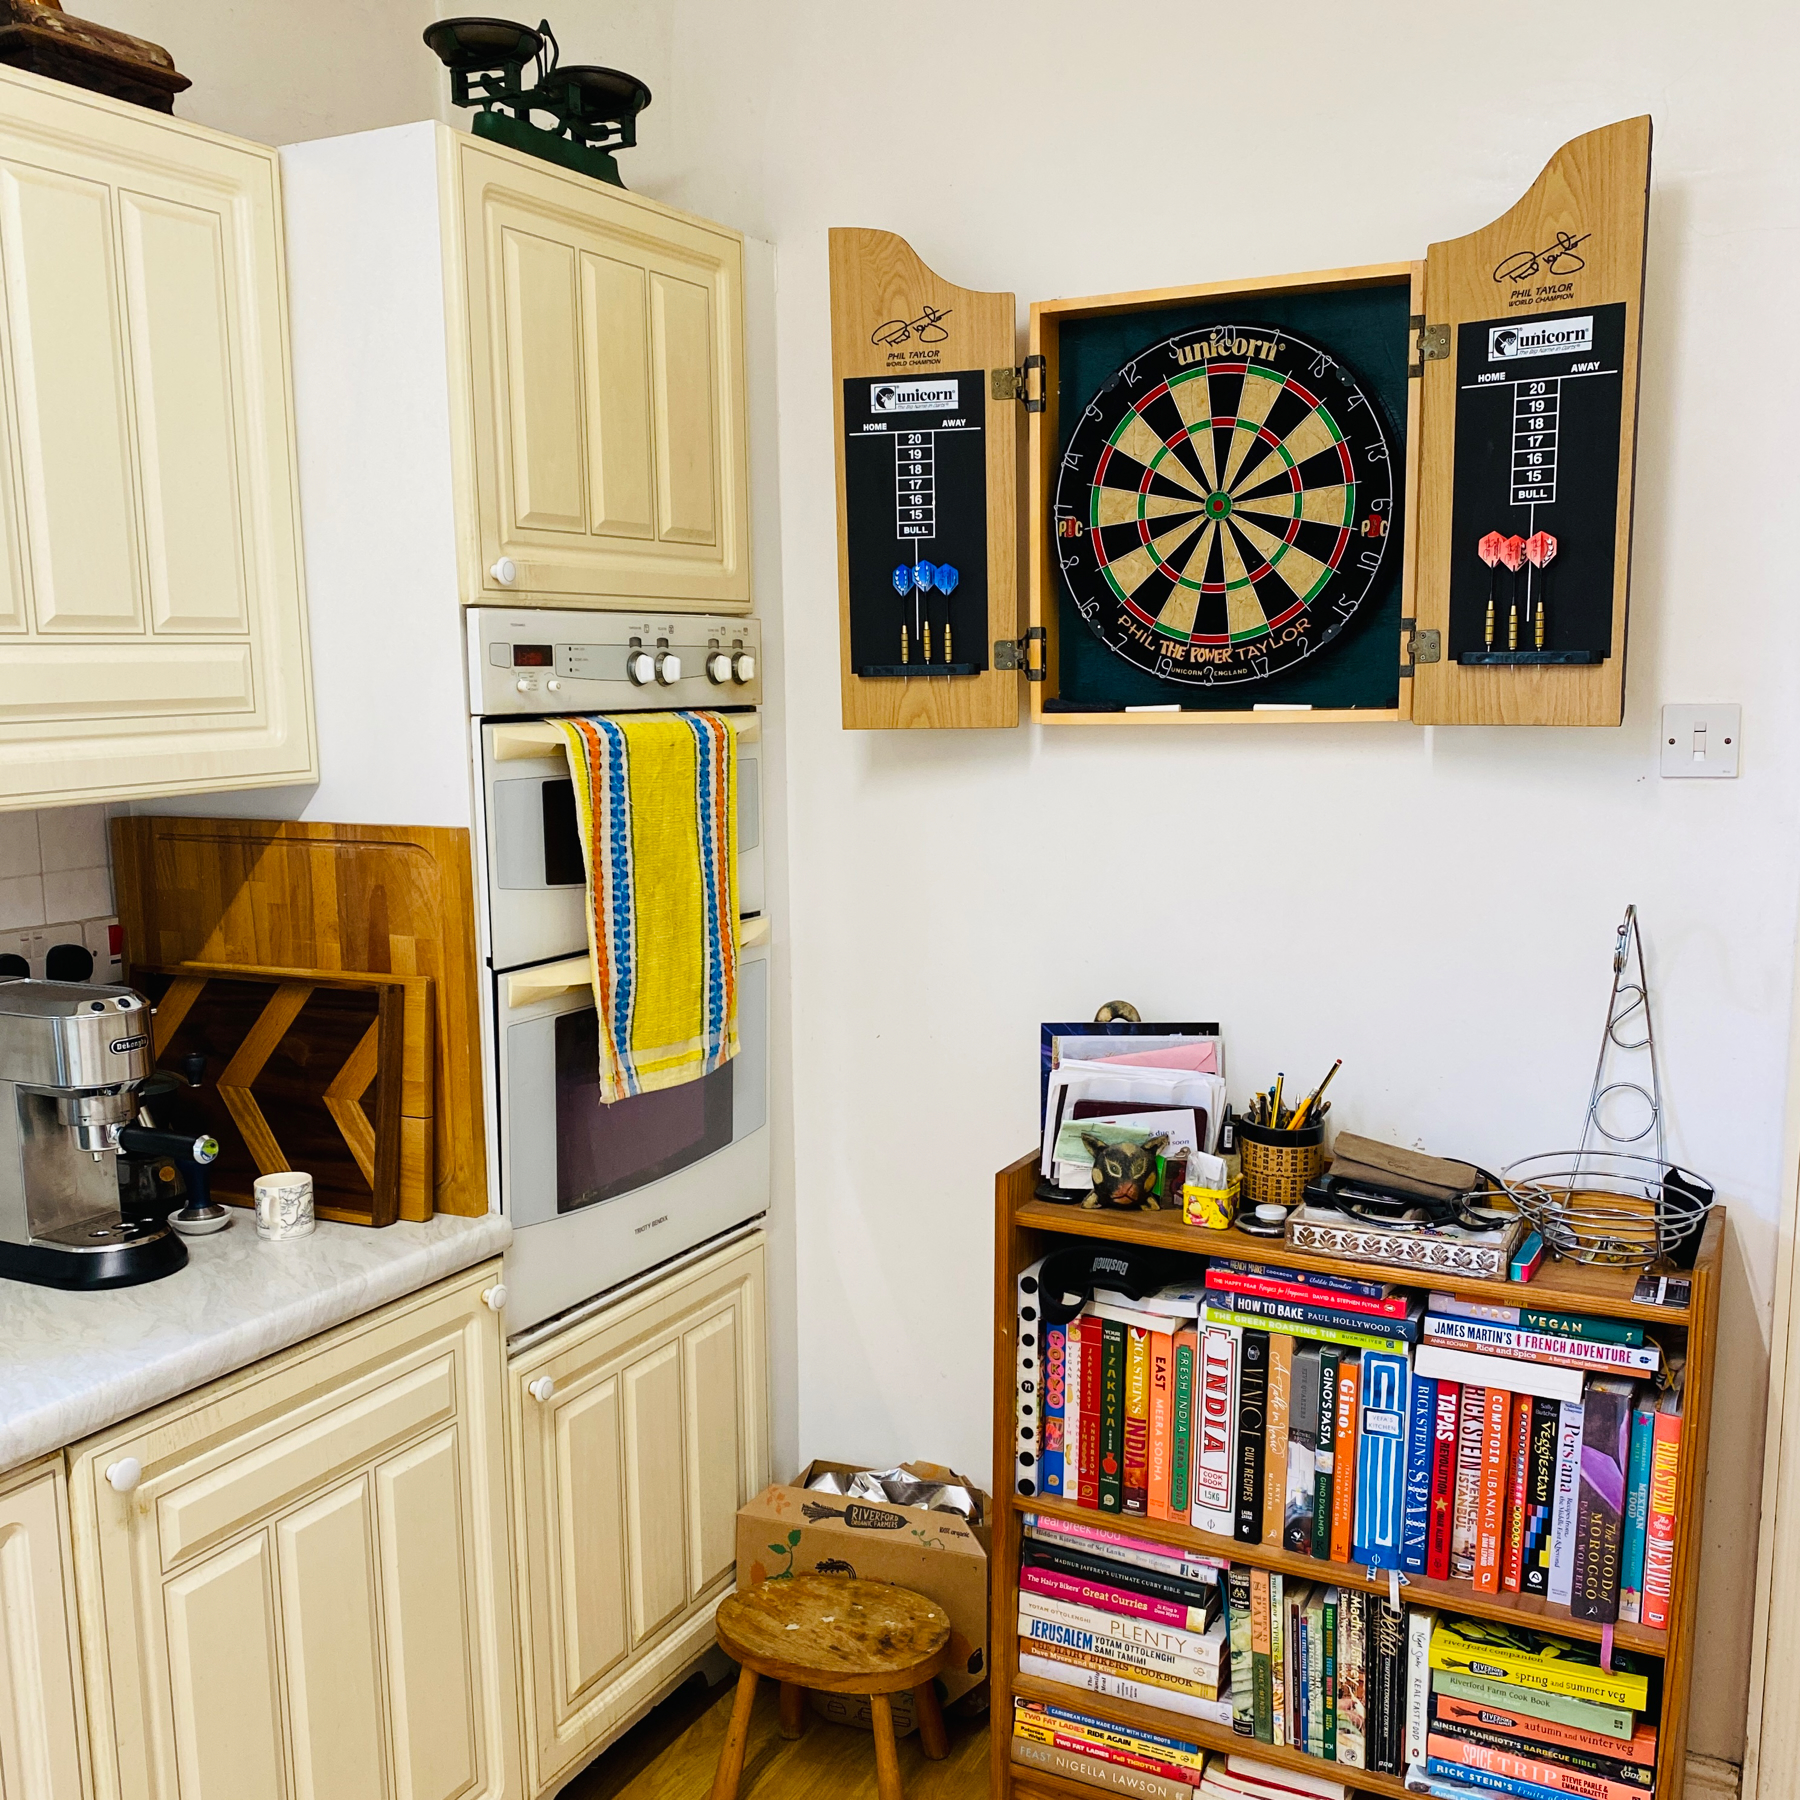 Dartboard mounted on a kitchen wall adjacent to the oven